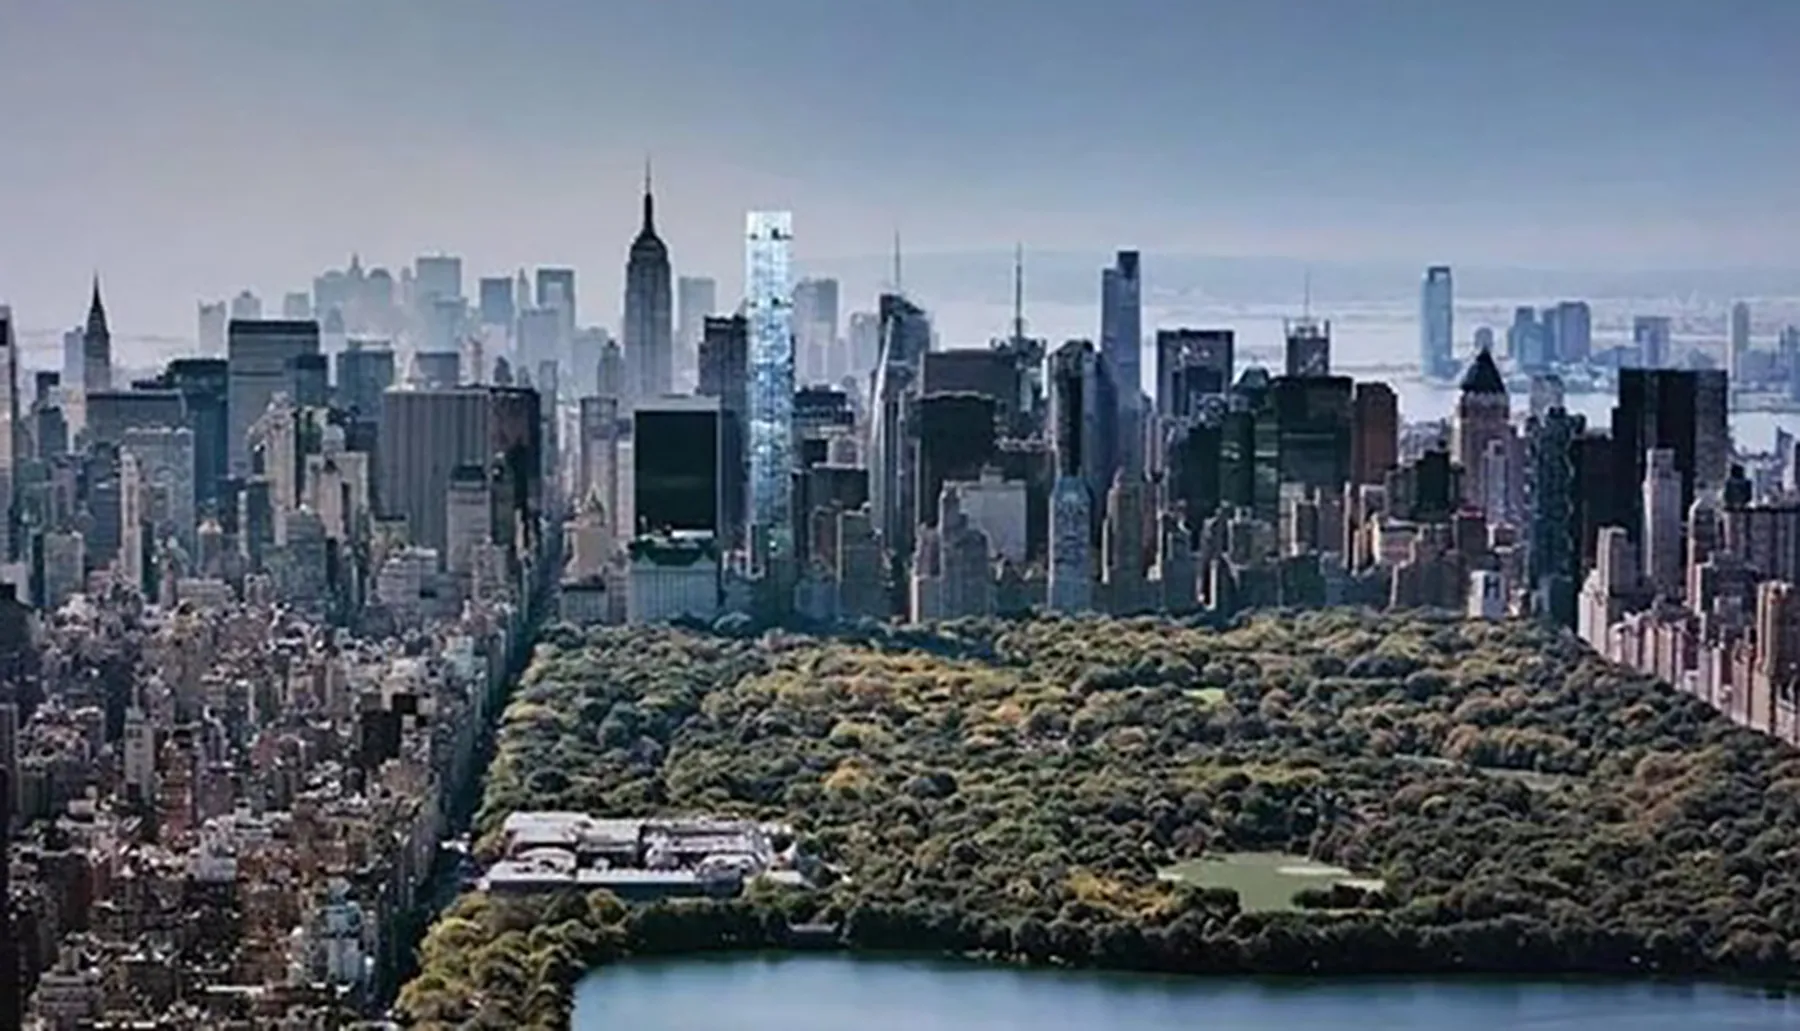 This image showcases a panoramic view of a dense urban skyline with a large park in the foreground, likely Central Park in New York City, contrasting nature with the built environment.